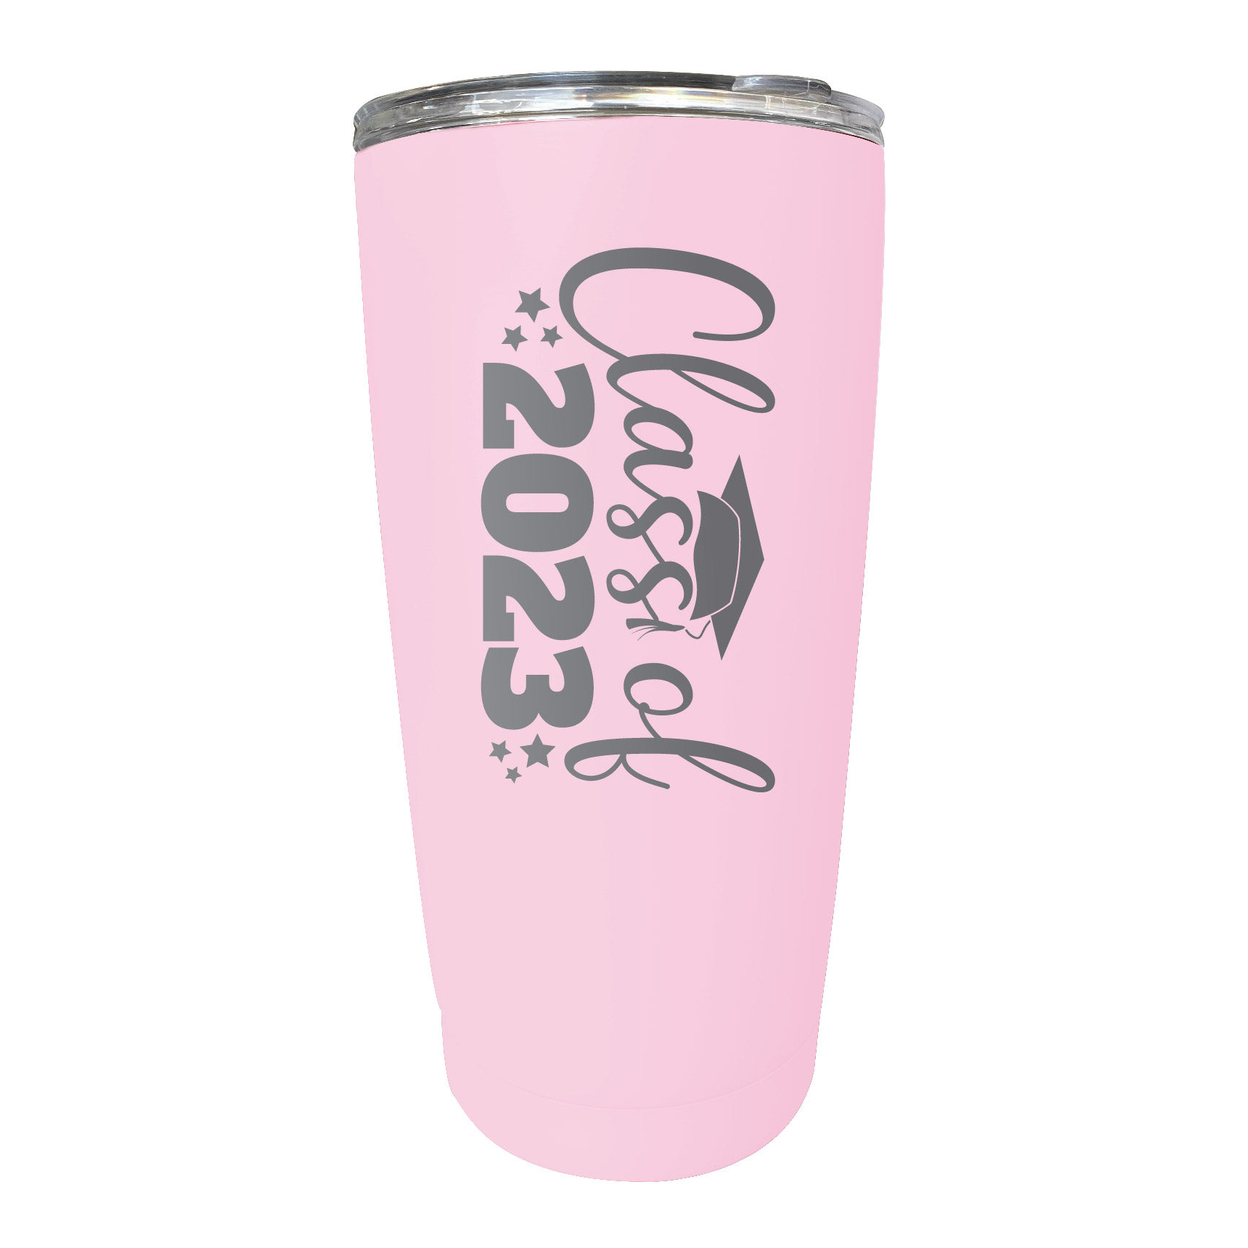 Class Of 2023 Graduation 16 Oz Engraved Stainless Steel Insulated Tumbler Colors - Pink